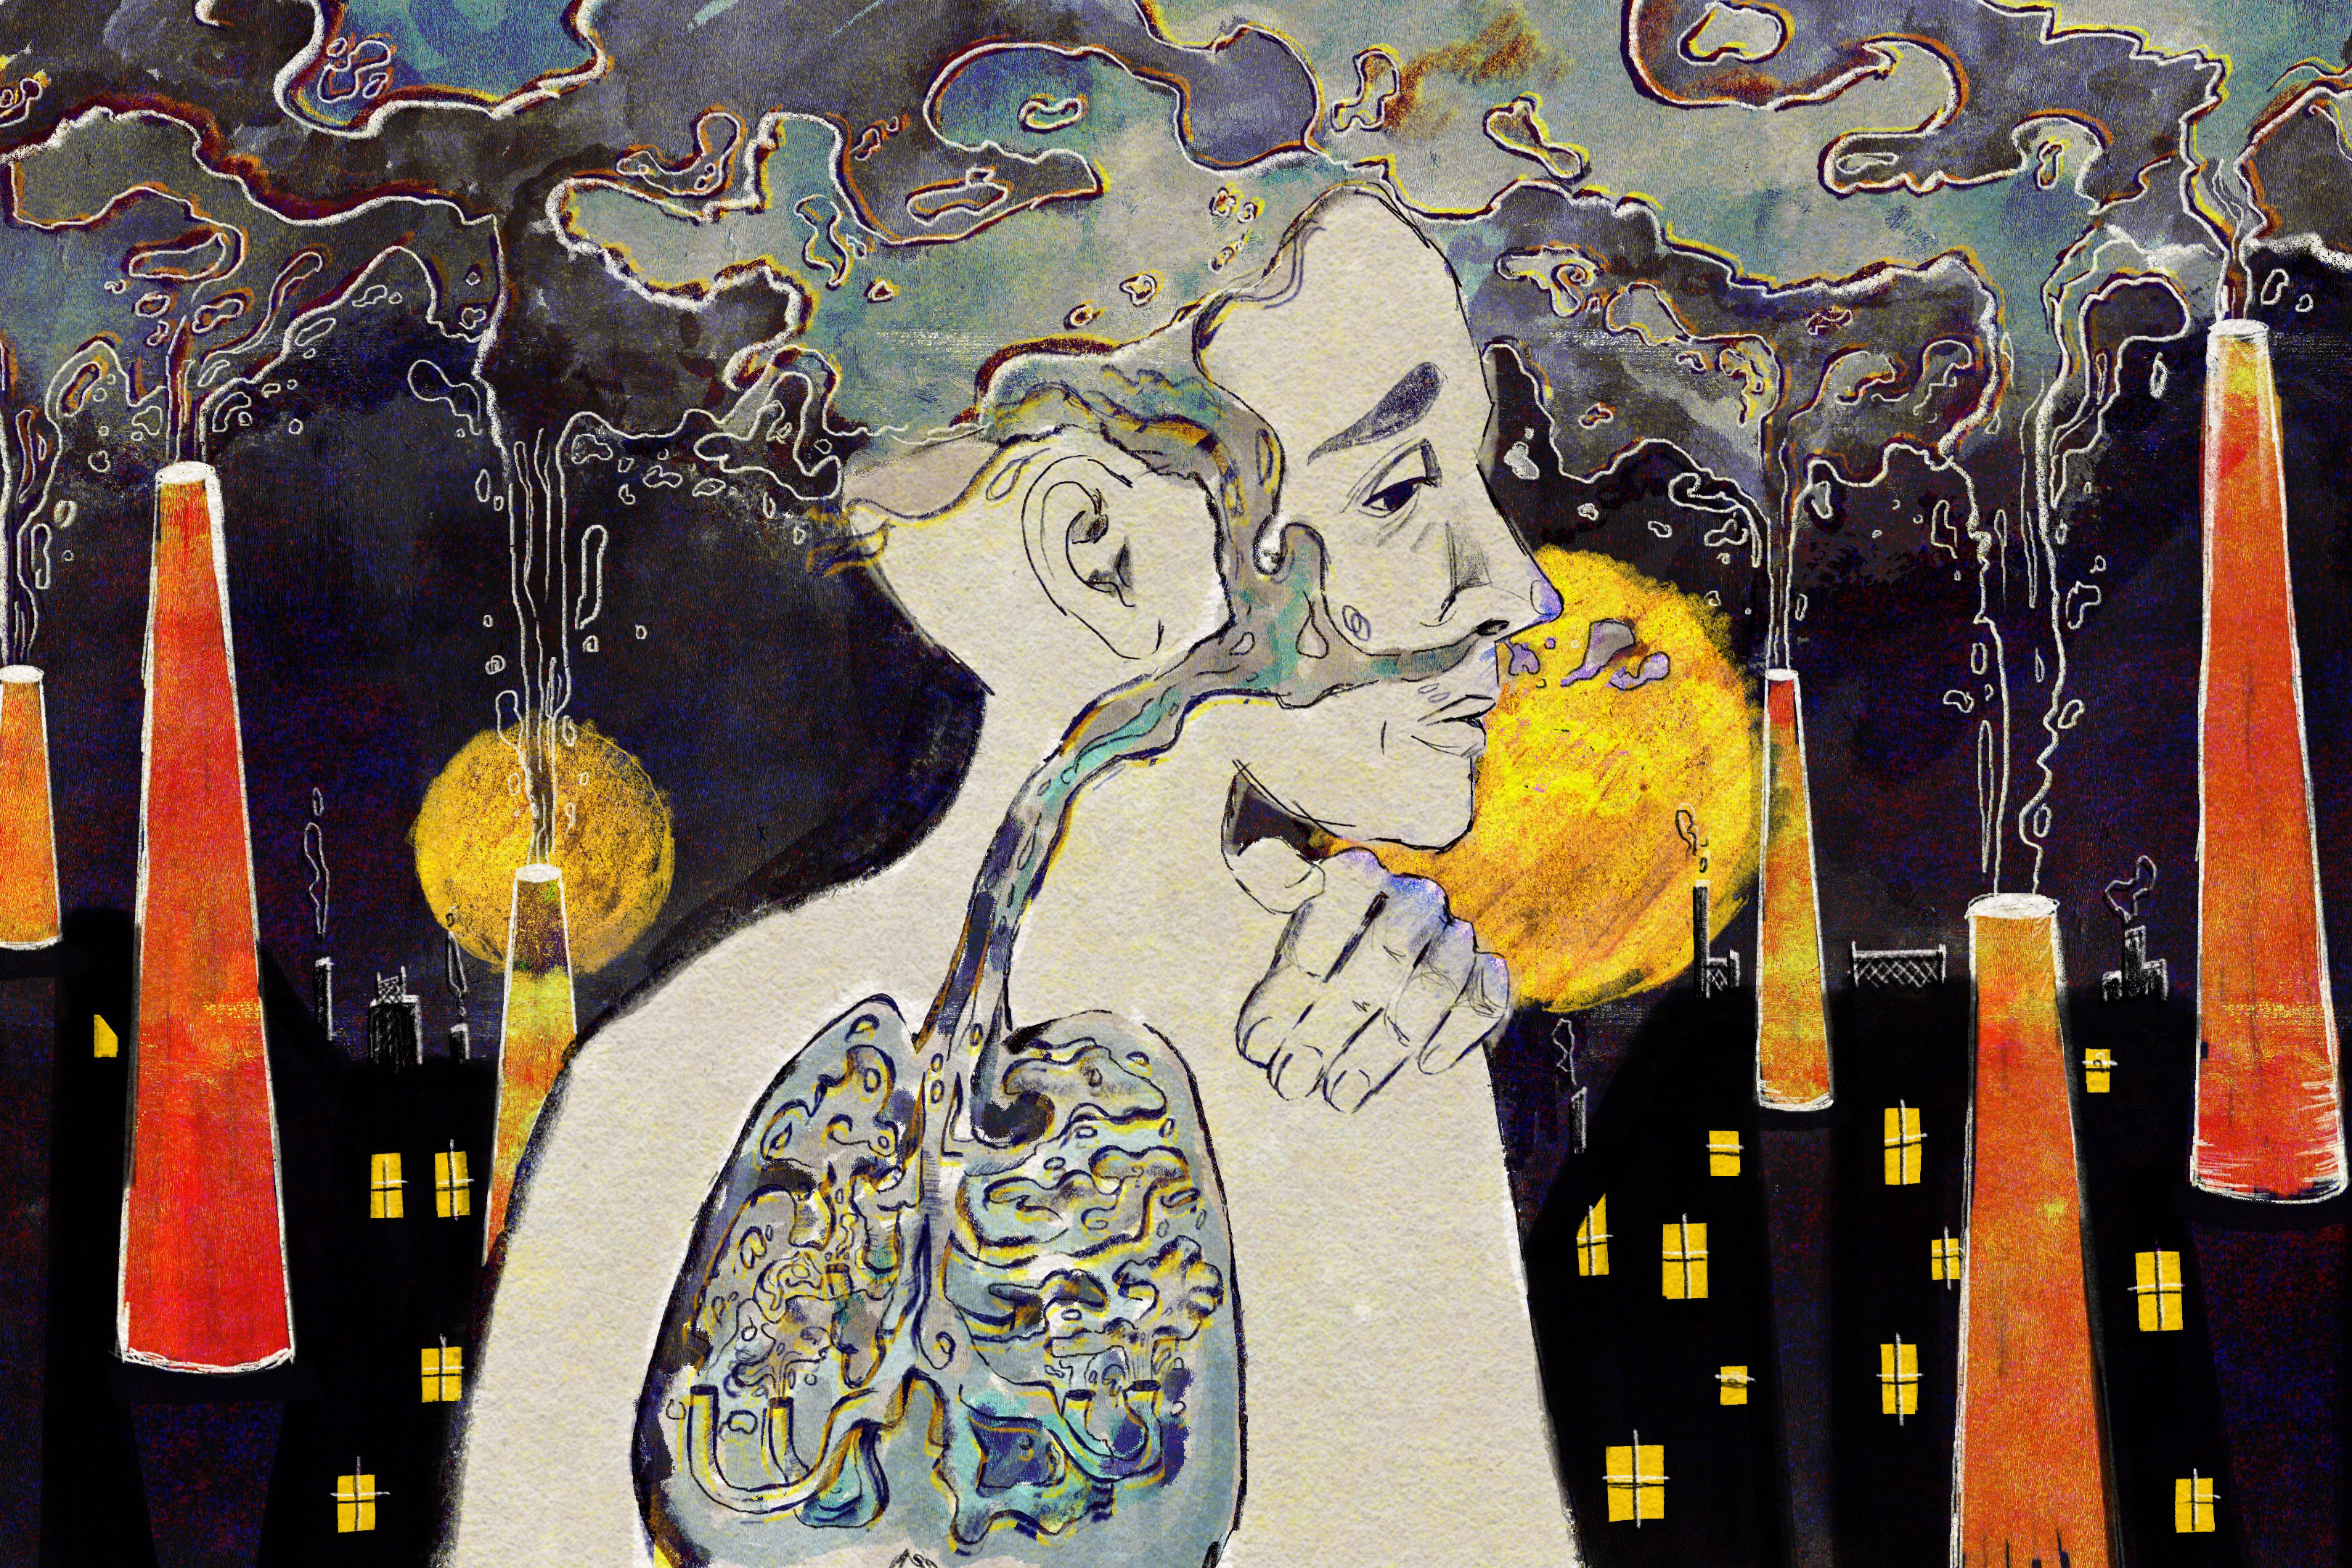 A digital illustration in watercolor and pencil shows a human with a melancholy expression at the center of the image. Their head is encircled by air pollution that billows up from surrounding smoke stacks. The background depicts a city at night. 